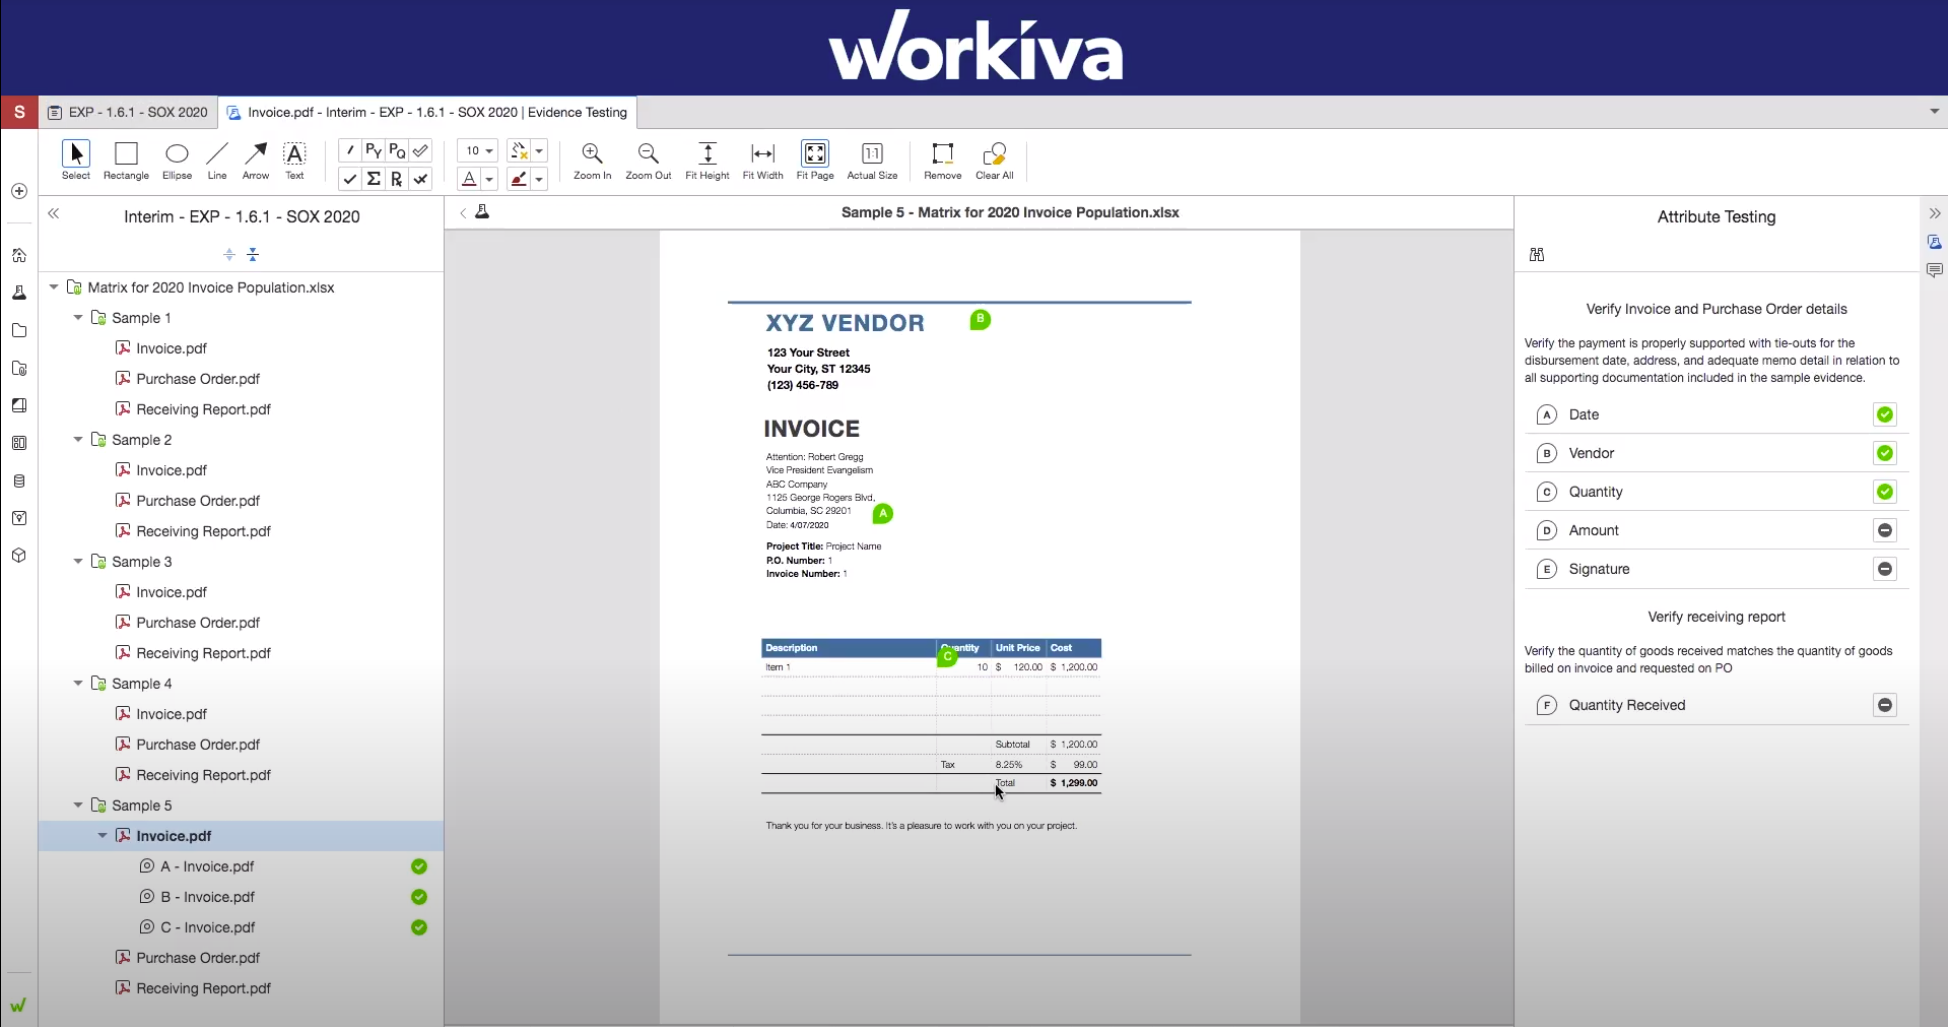 Workiva's attribute testing and auto-updating test forms